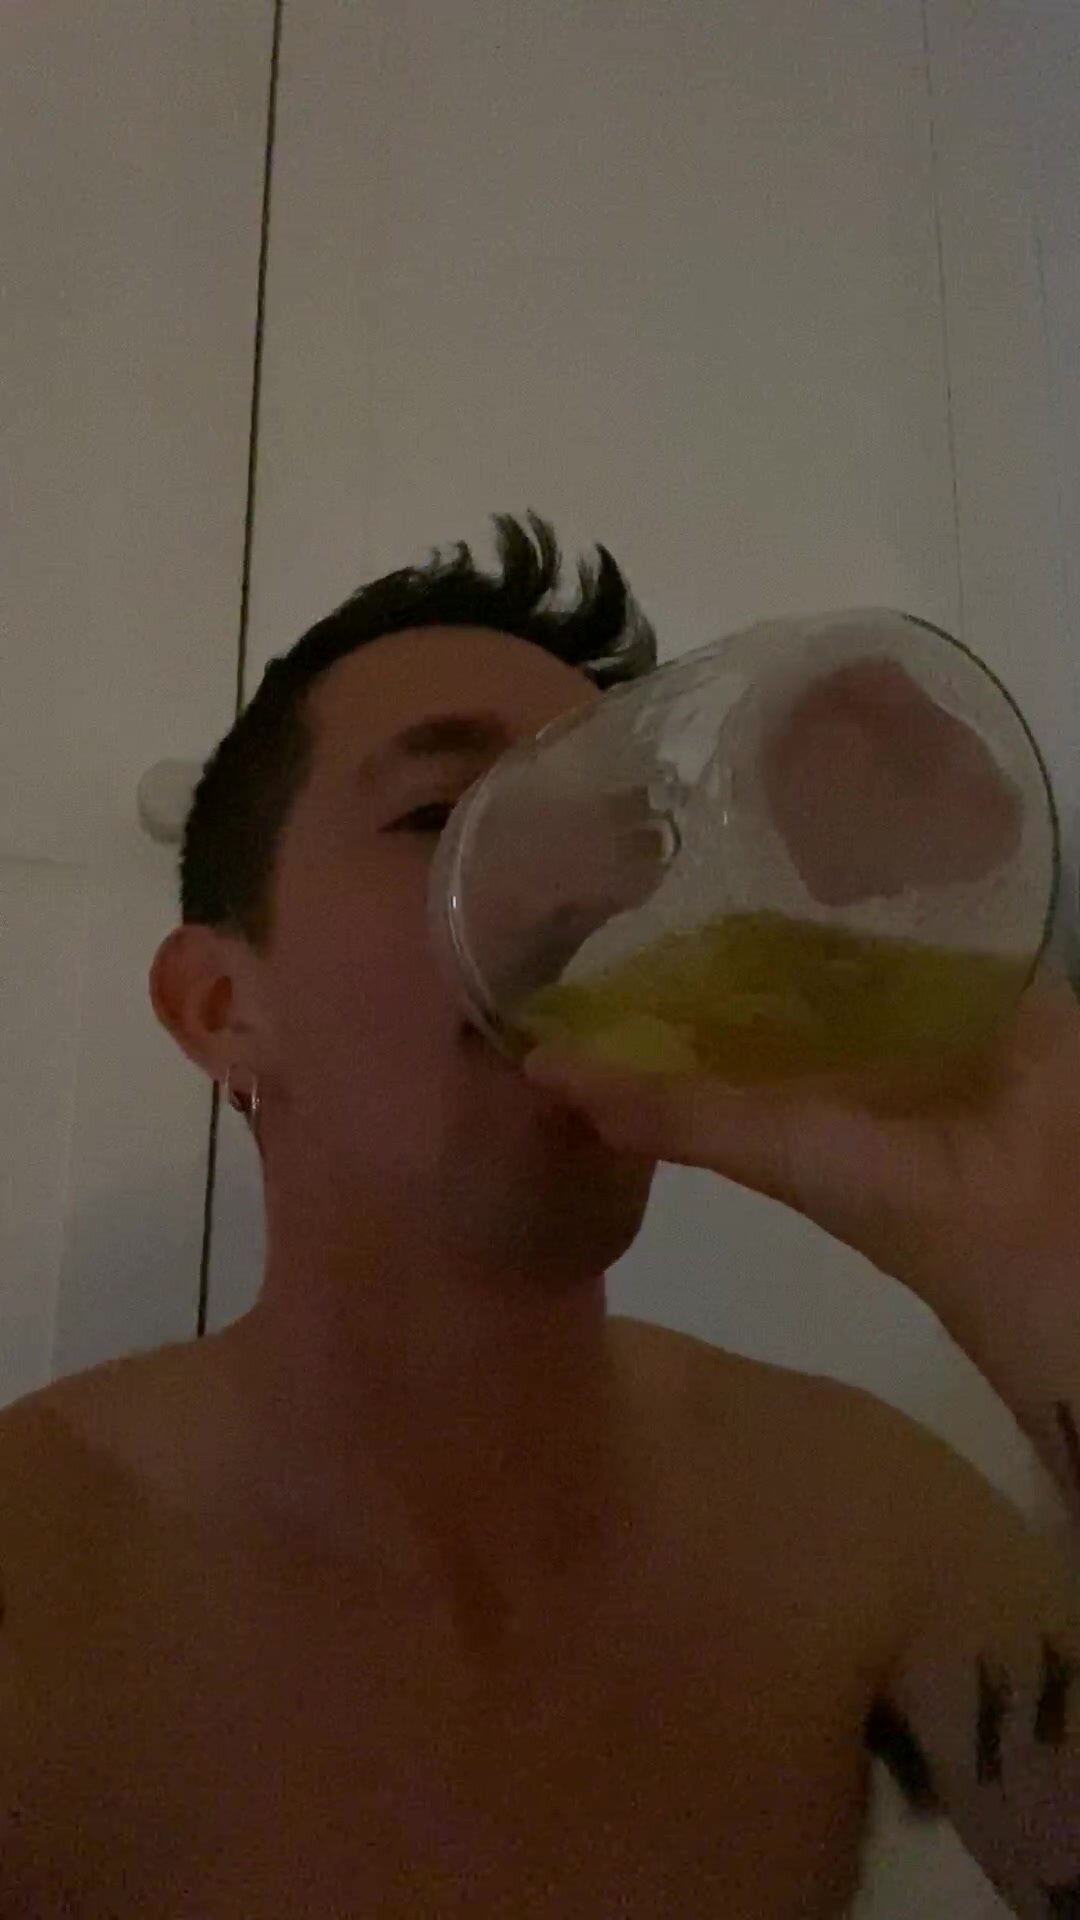 Drinking my own piss - video 4